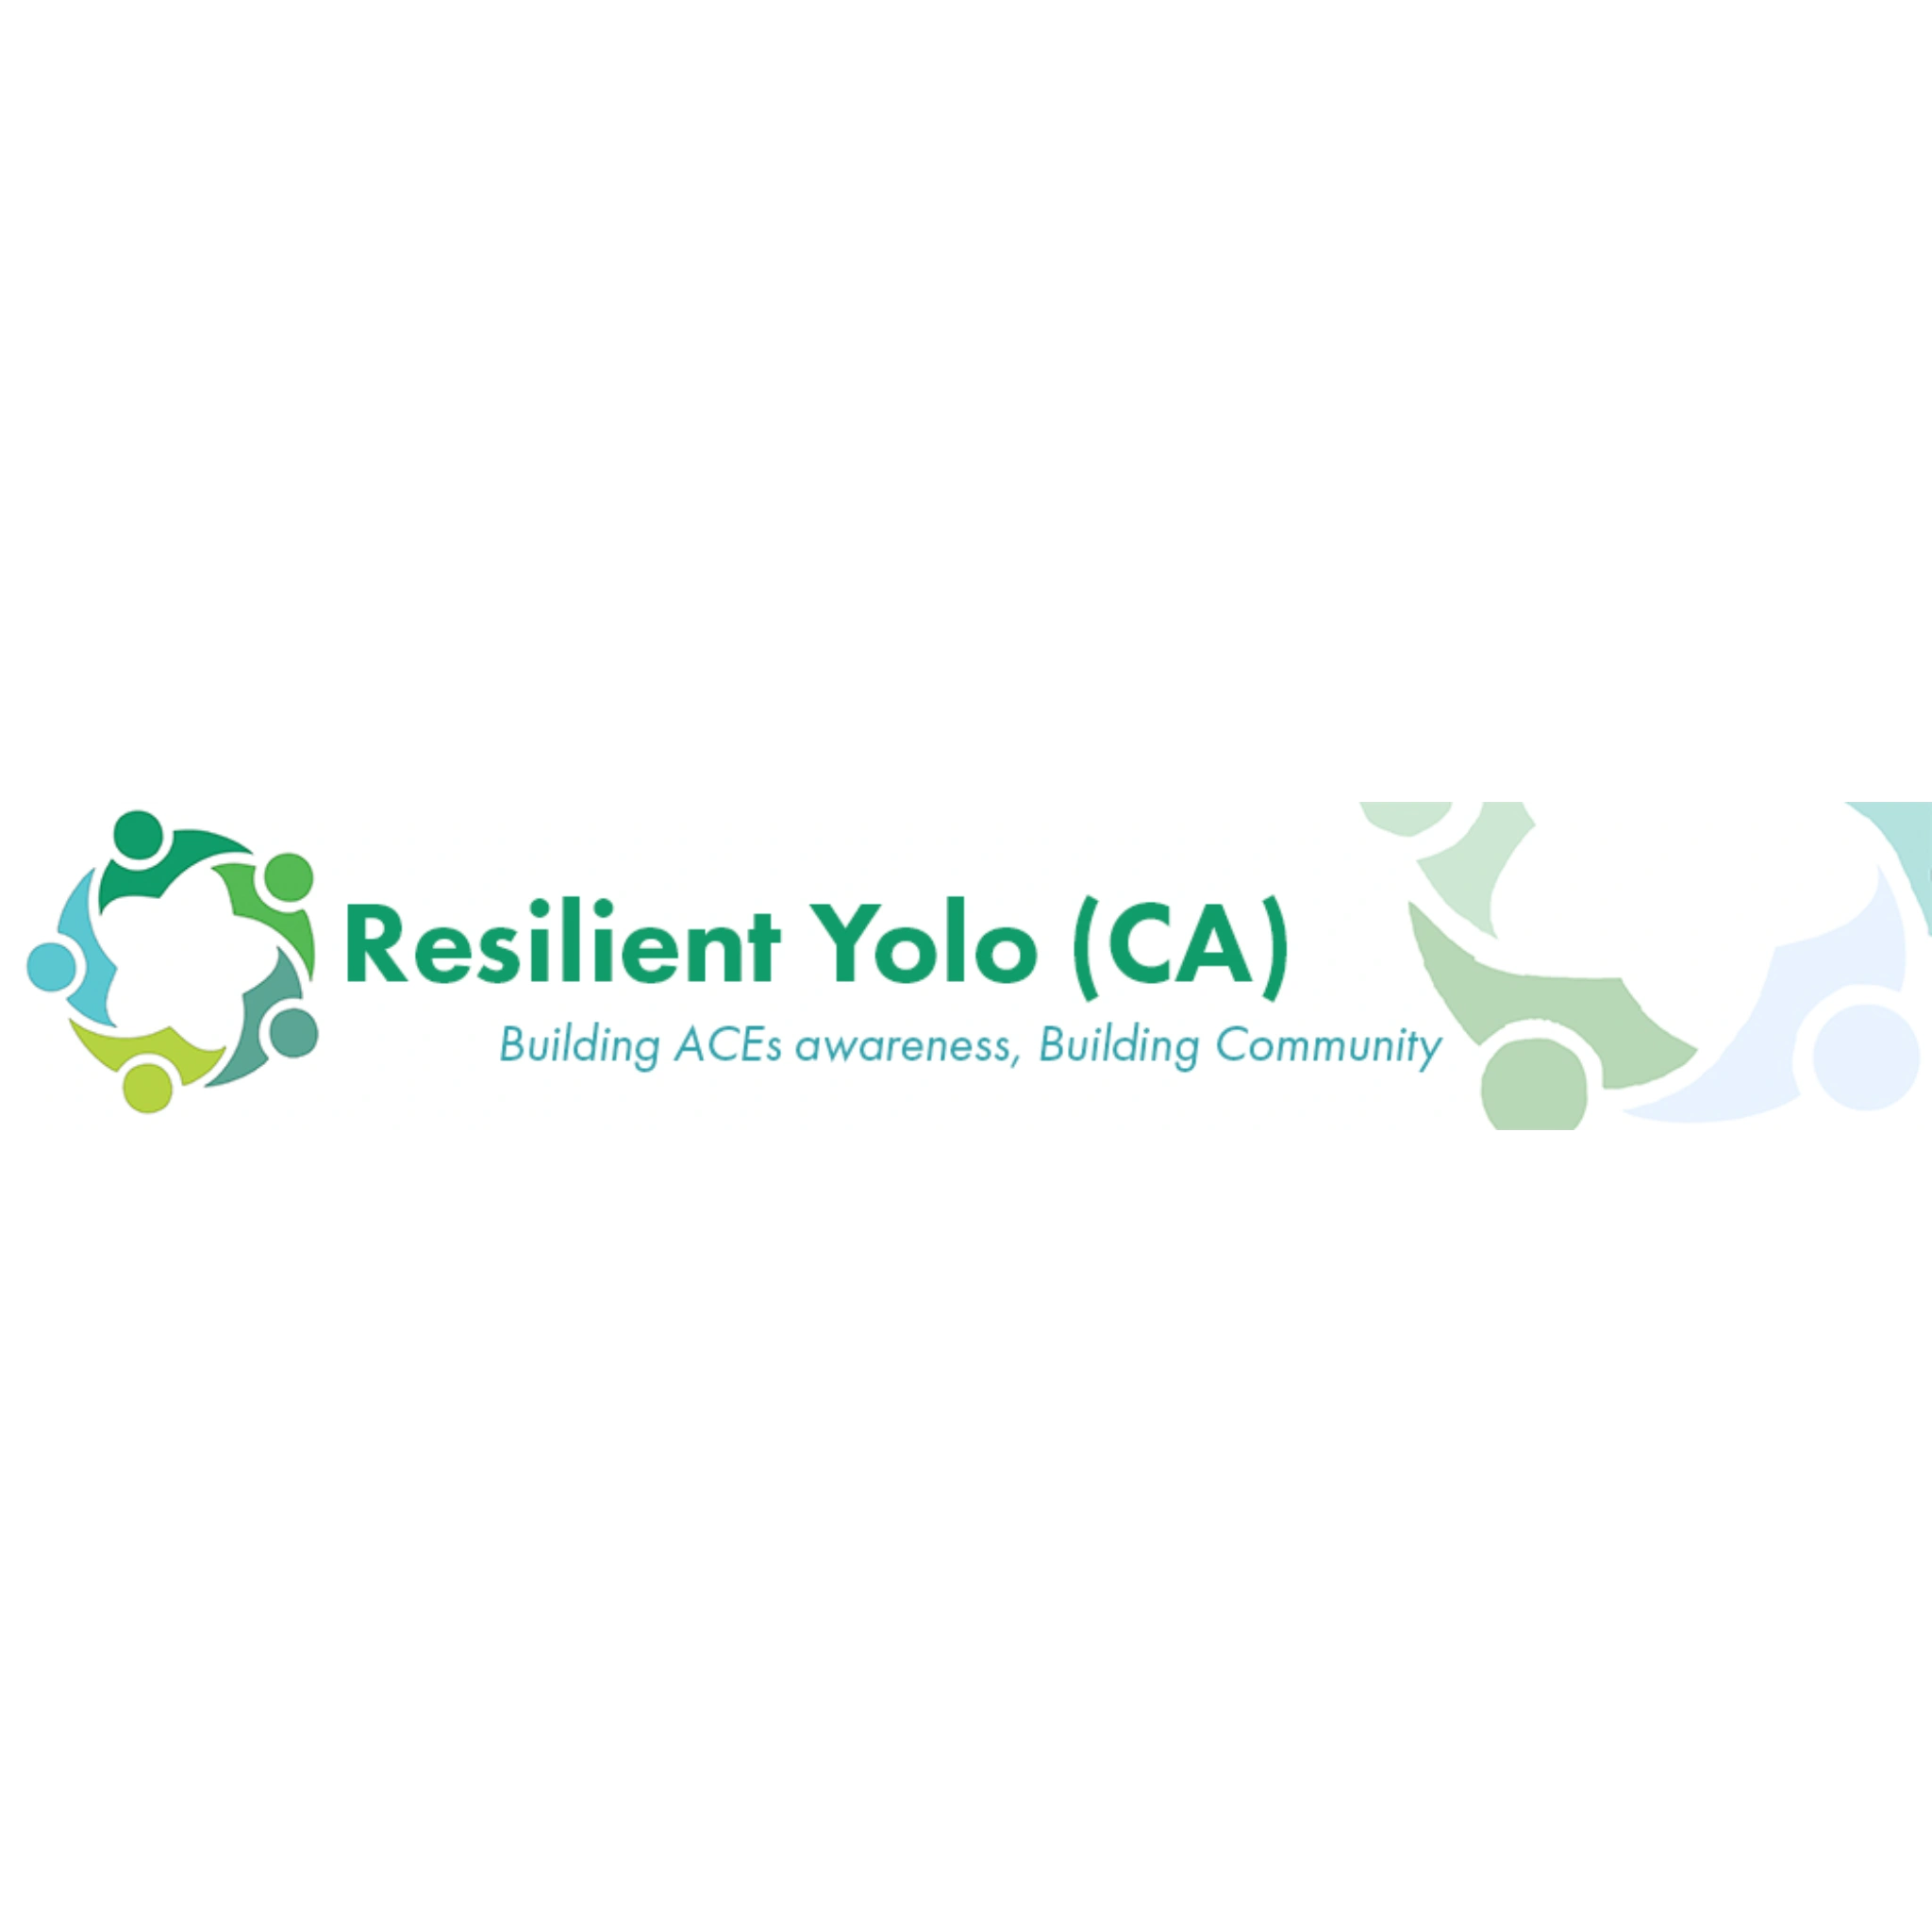 Building A Resilient Yolo